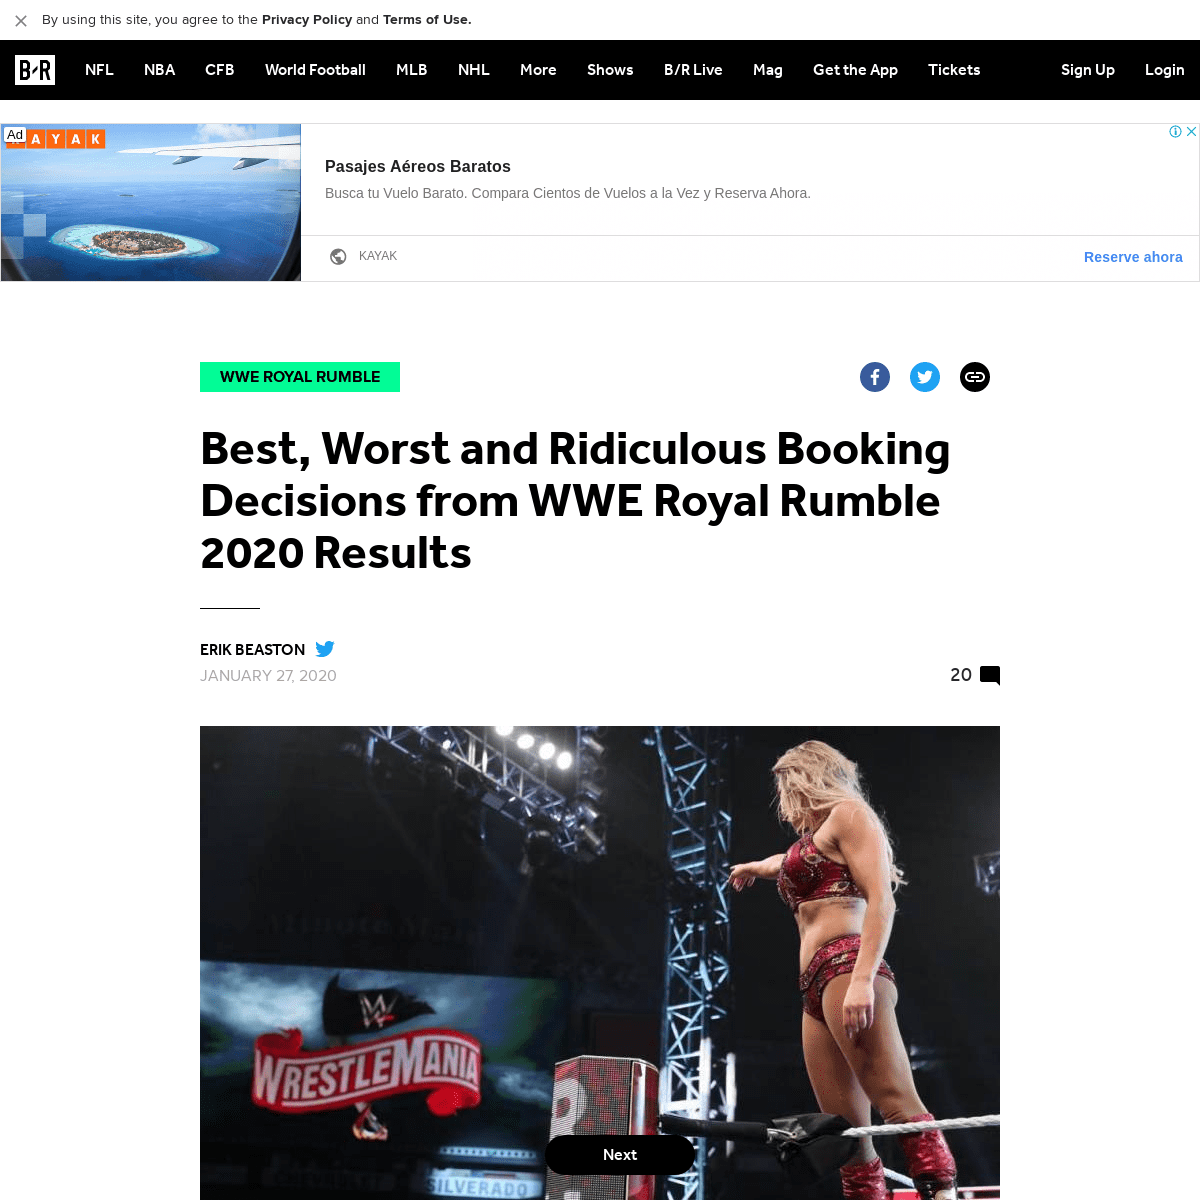 A complete backup of bleacherreport.com/articles/2873296-best-worst-and-ridiculous-booking-decisions-from-wwe-royal-rumble-2020-